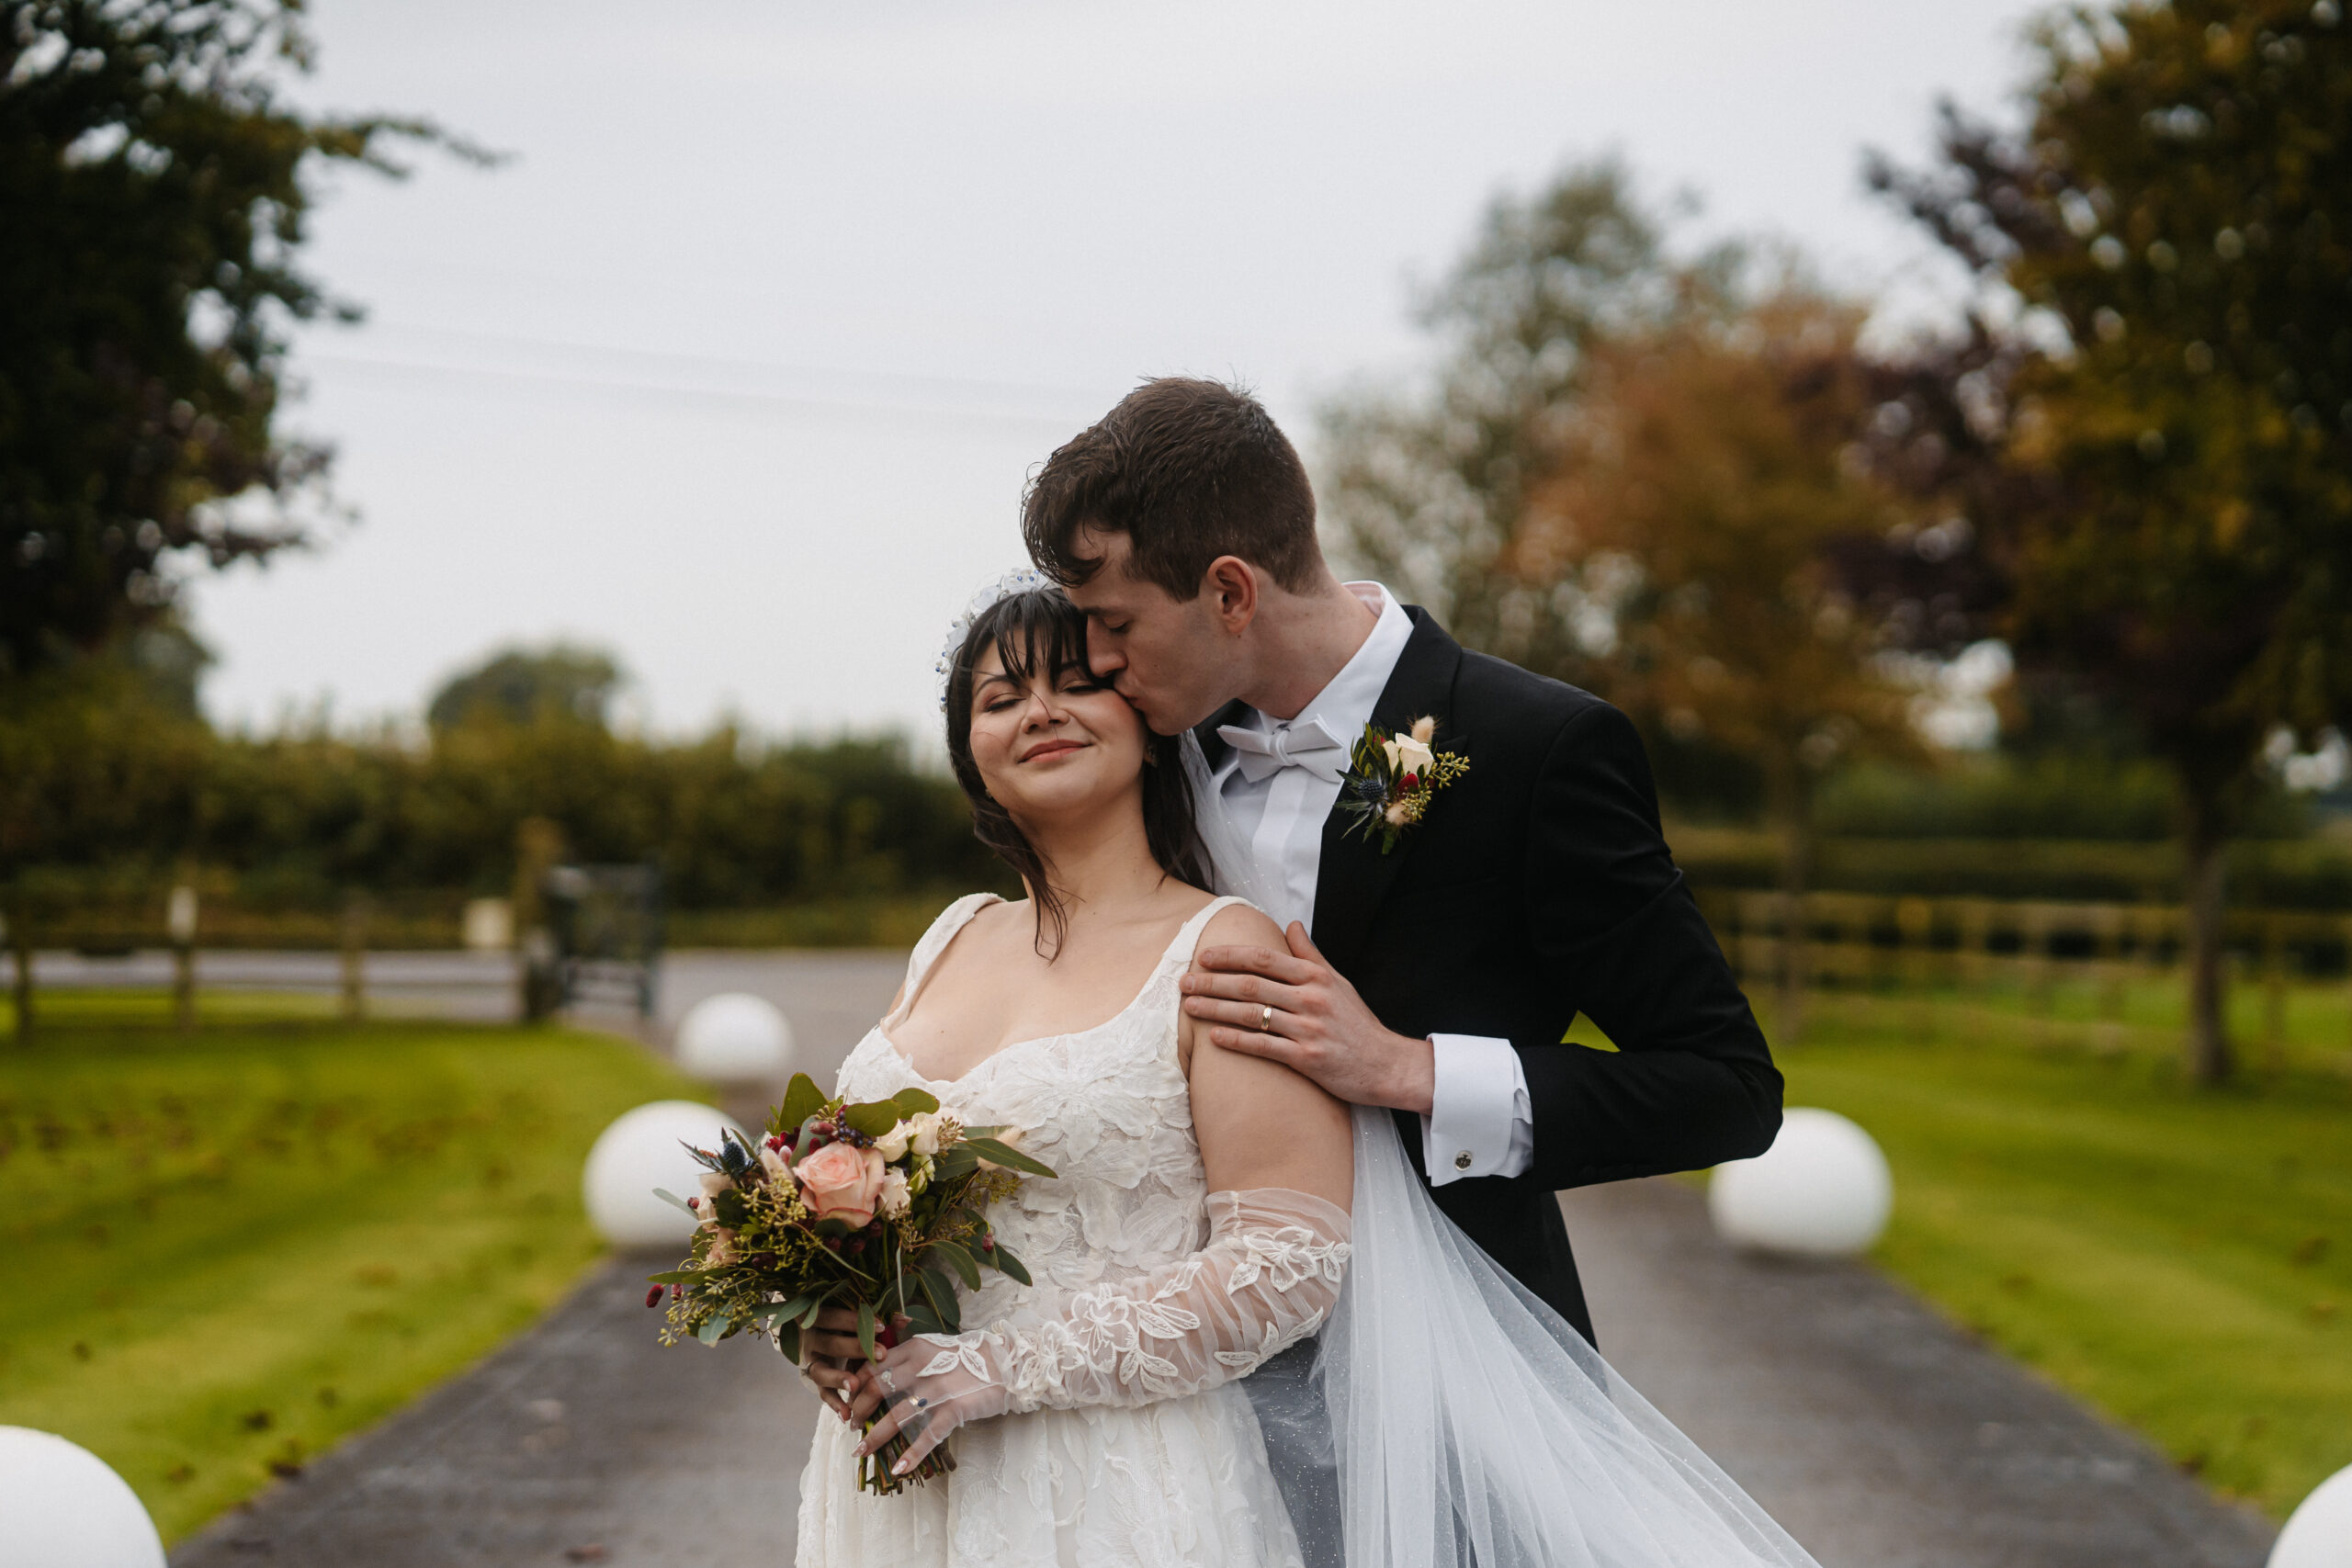 Manchester Photo and Video Wedding Services